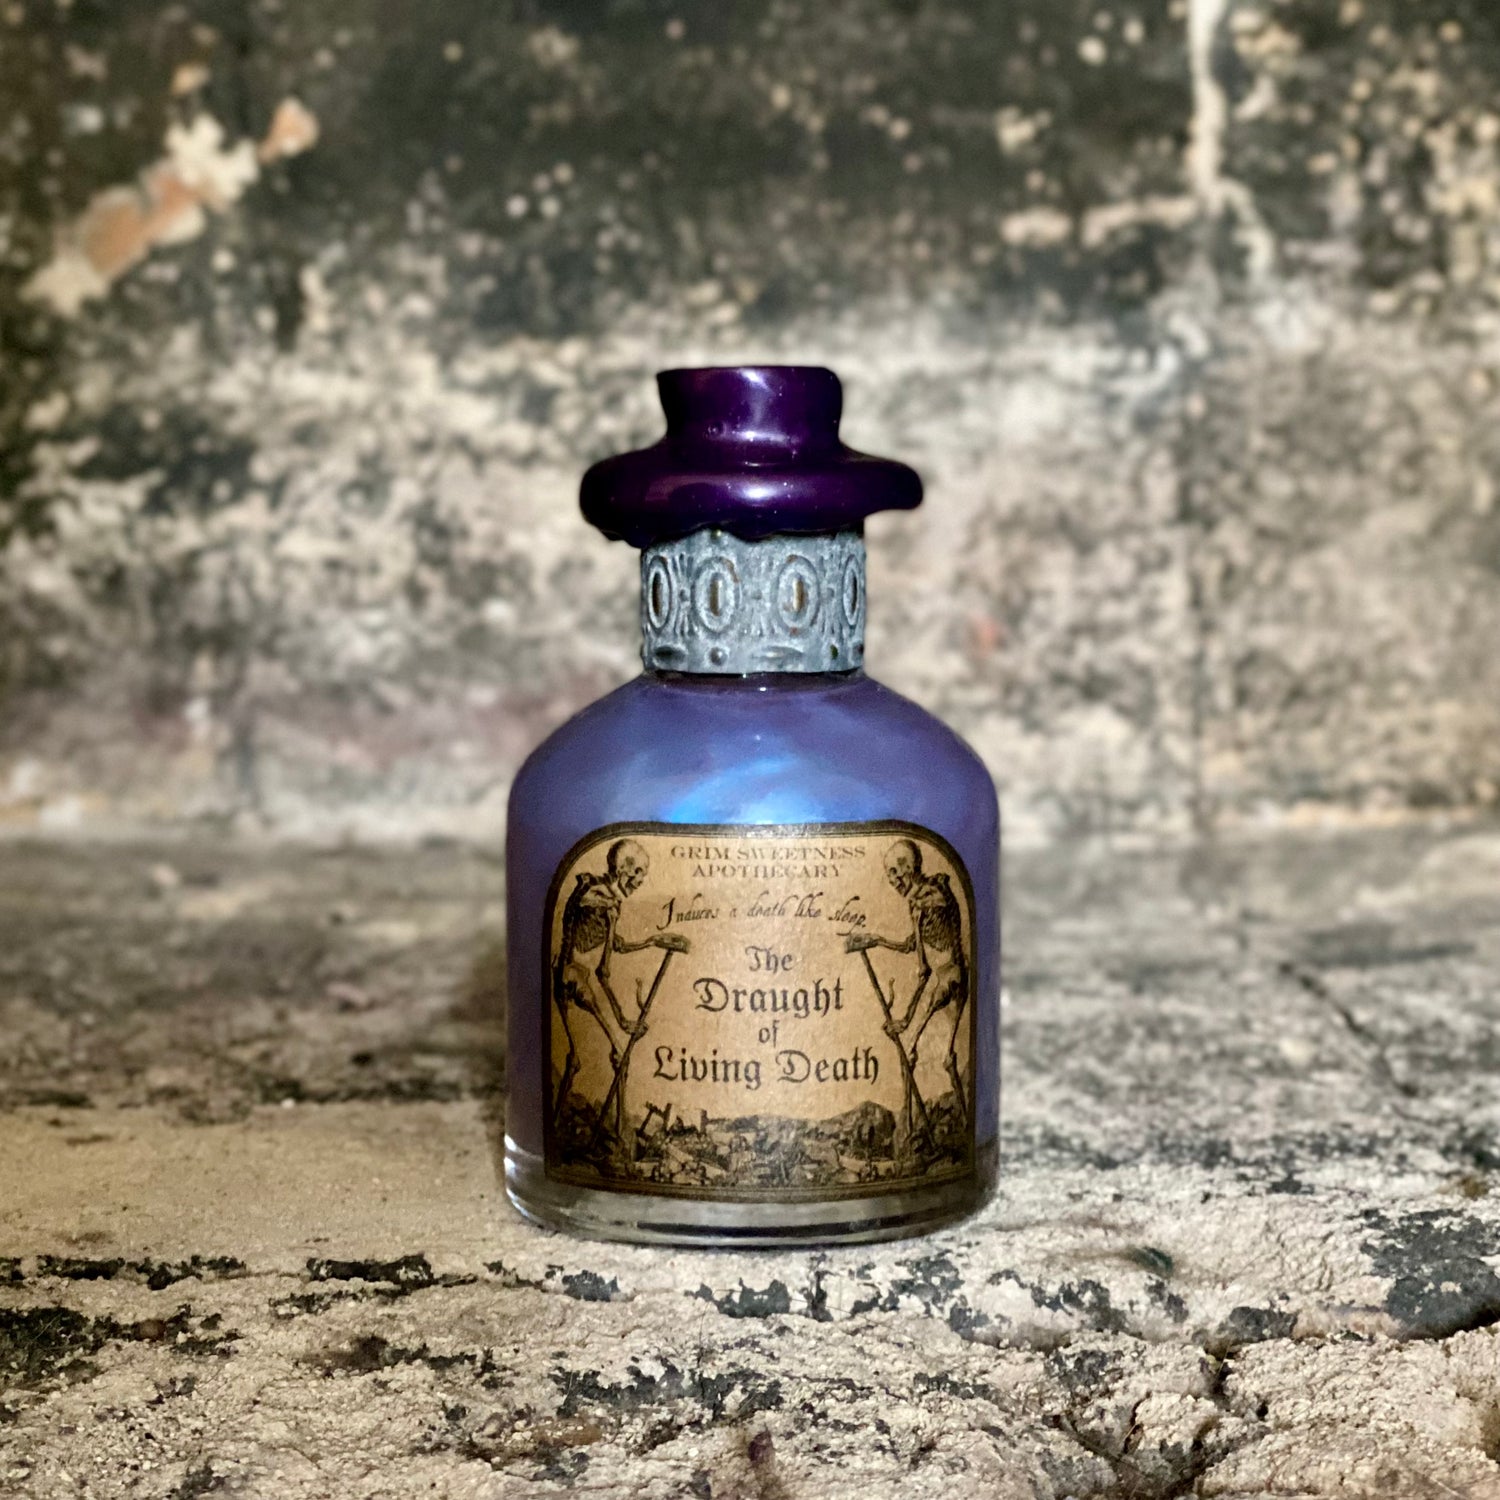 Harry Potter Potion of Drought Apothecary Kit: unknown author